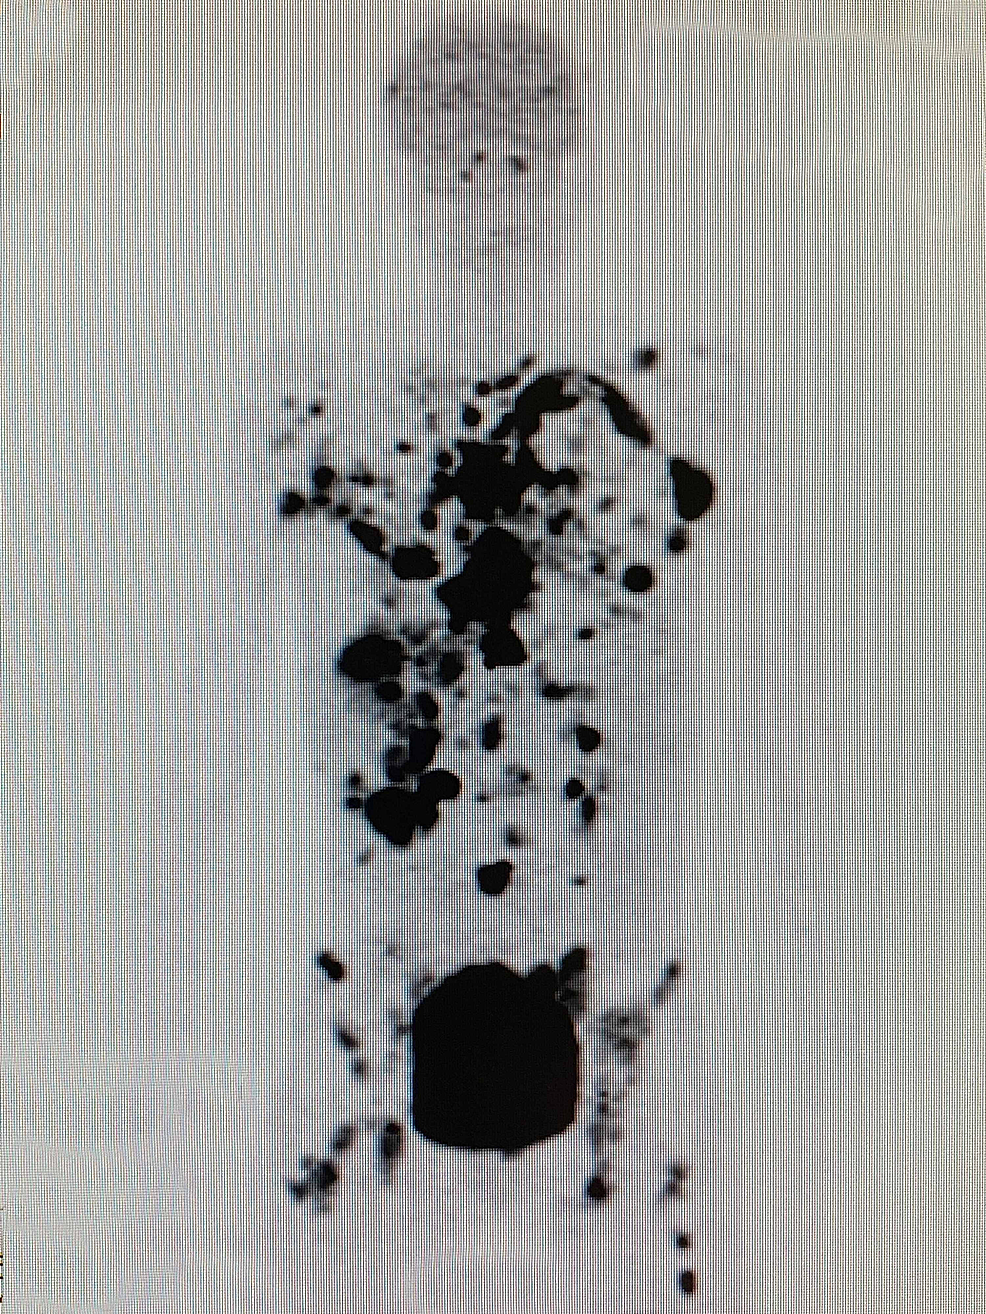 Whole-body-(18F)-FDG-PET/CT-scan-done-before-treatment-on-November-5,-2018-showing-widespread-multiple-metastatic-lesions-at-the-lungs,-mediastinum,-liver,-abdomen-and-bones.